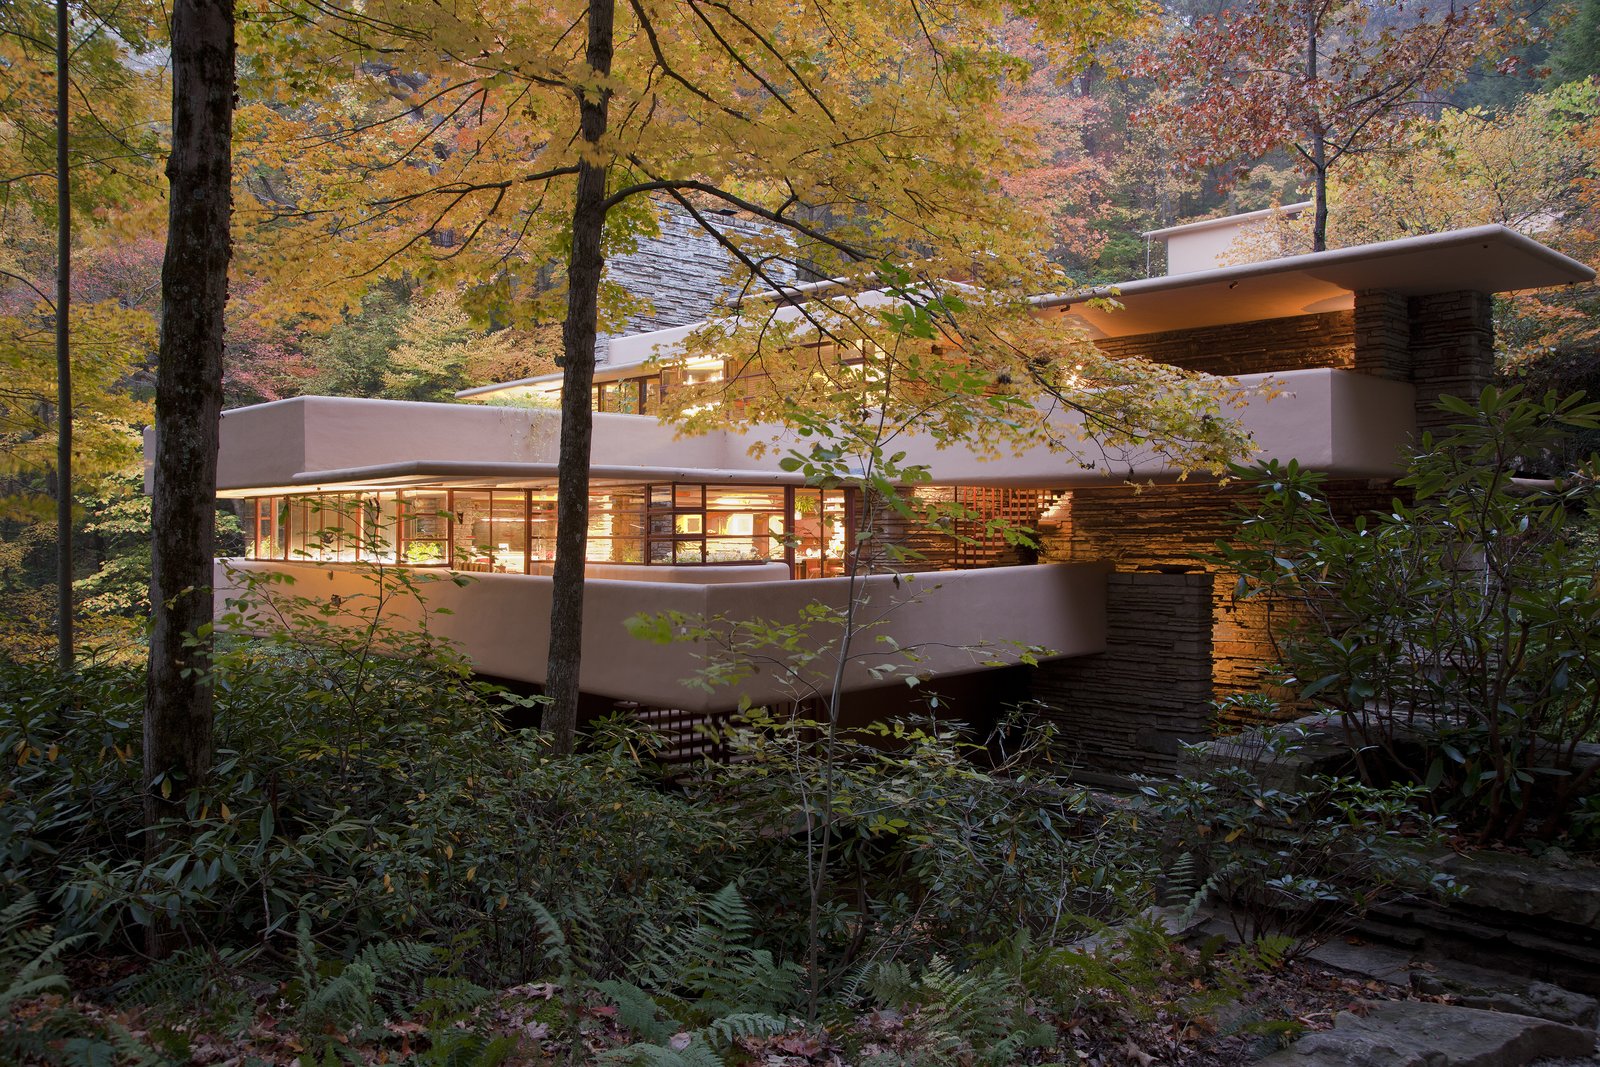 Over 80 Years Later, Fallingwater Still Has Lessons to Teach Us